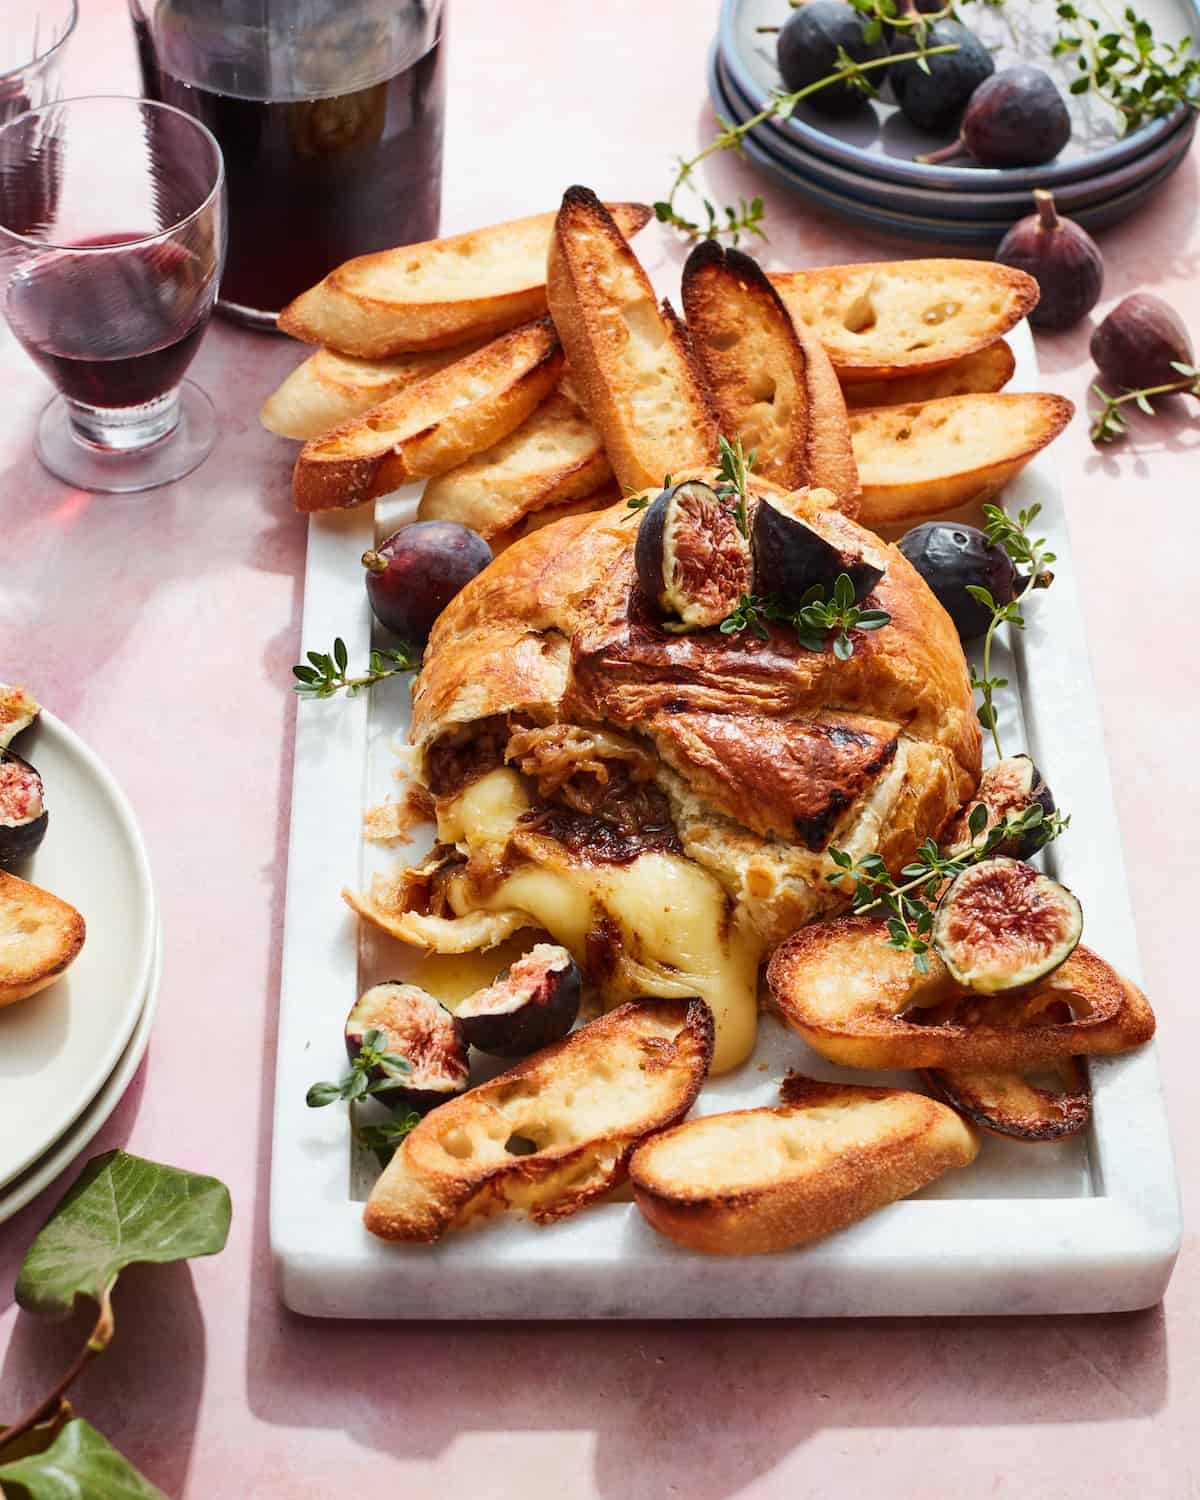 A  white marble rectangular platter with puff pastry wrapped baked brie, melting out of the puff pastry, baguette slices, thyme sprigs, halved figs along with some stacked plates, wine, a wine glass and more whole figs on the side.